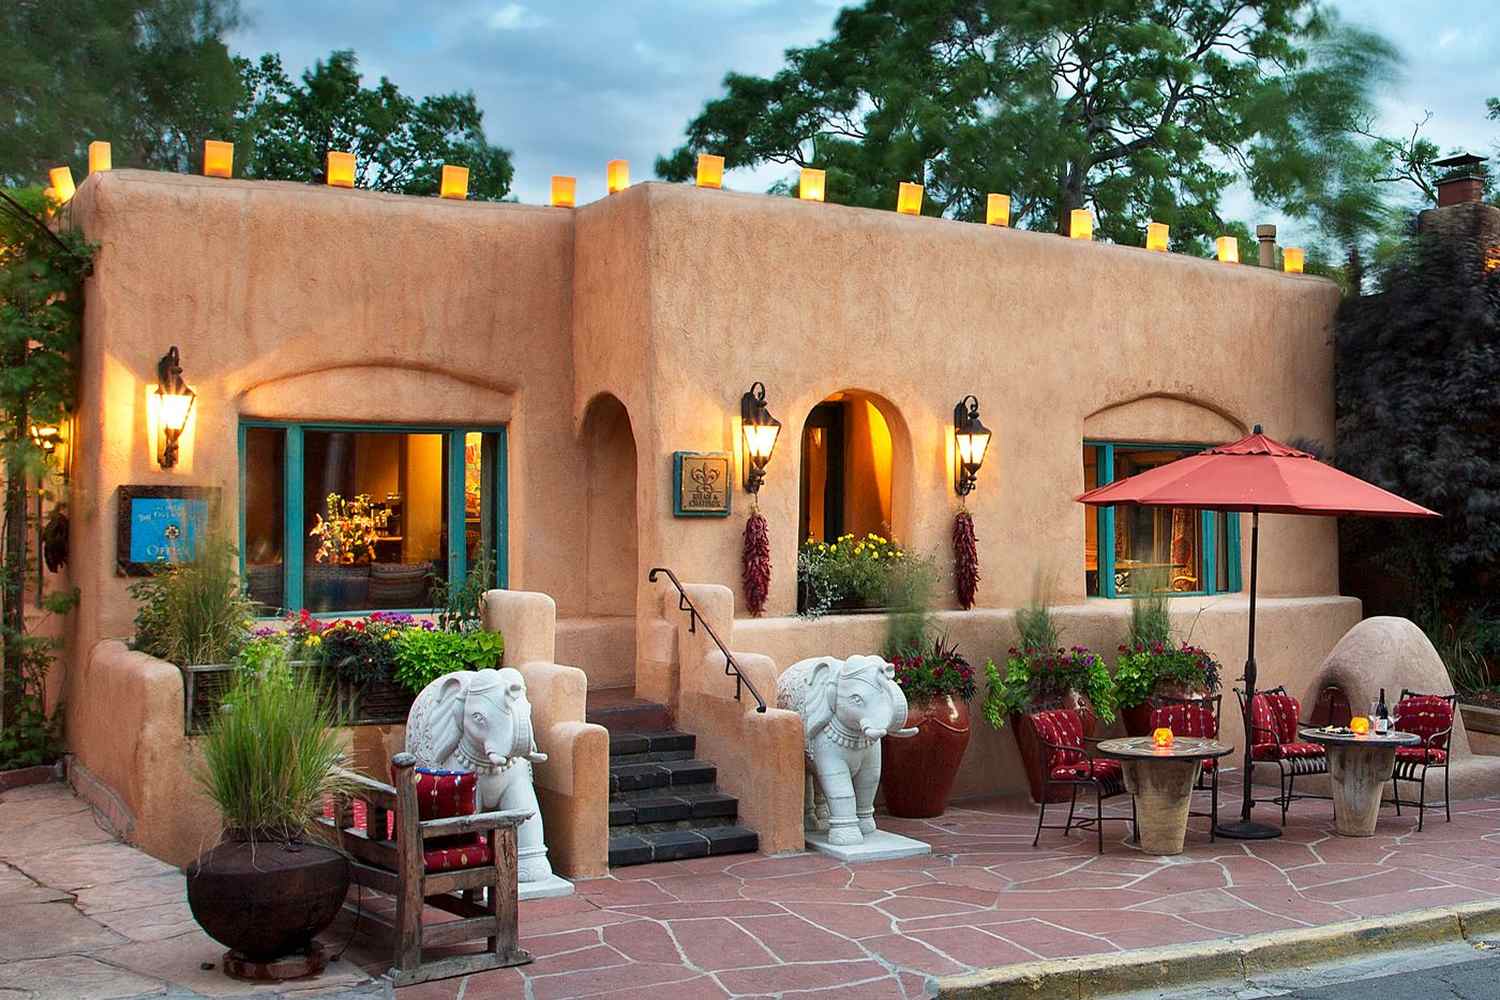 The Inn Of The Five Graces Santa Fe, New Mexico - United States Of America